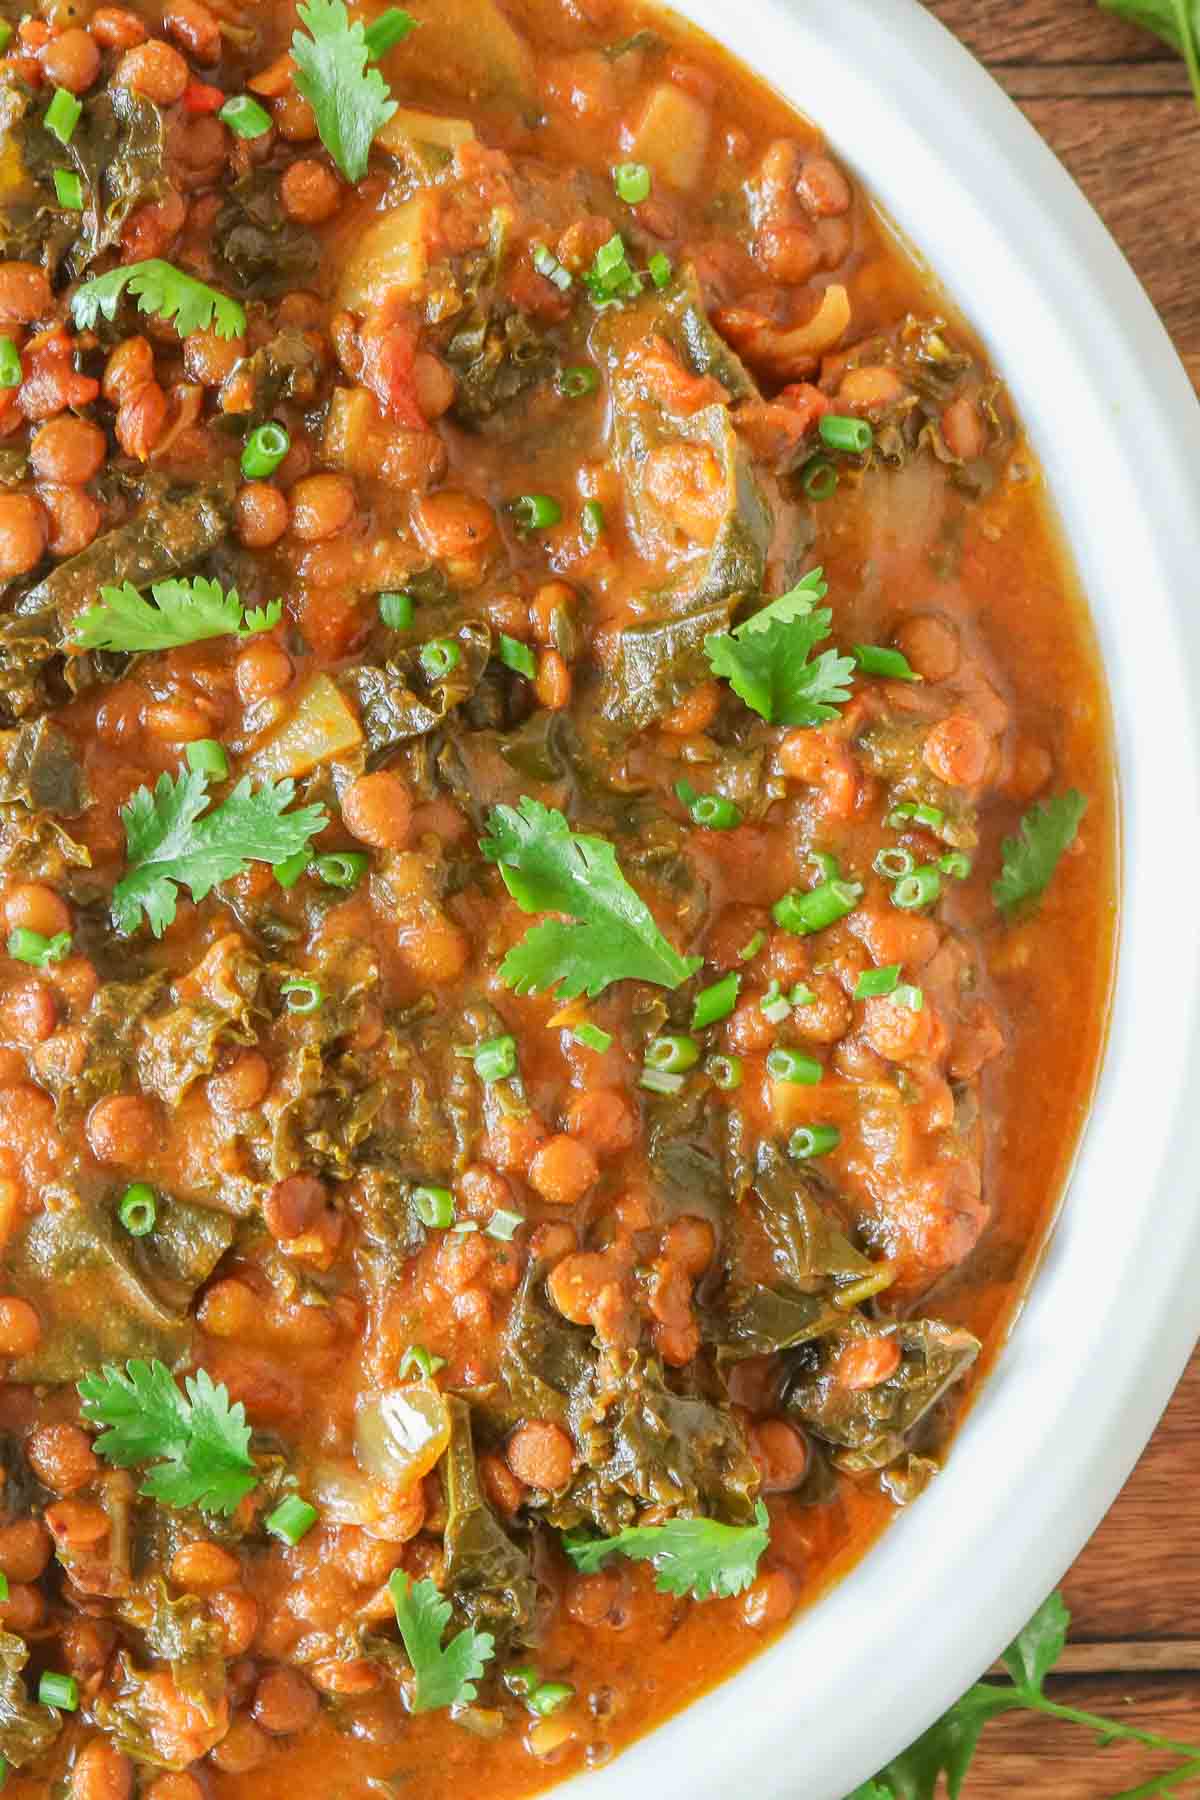 Curried Green Lentils